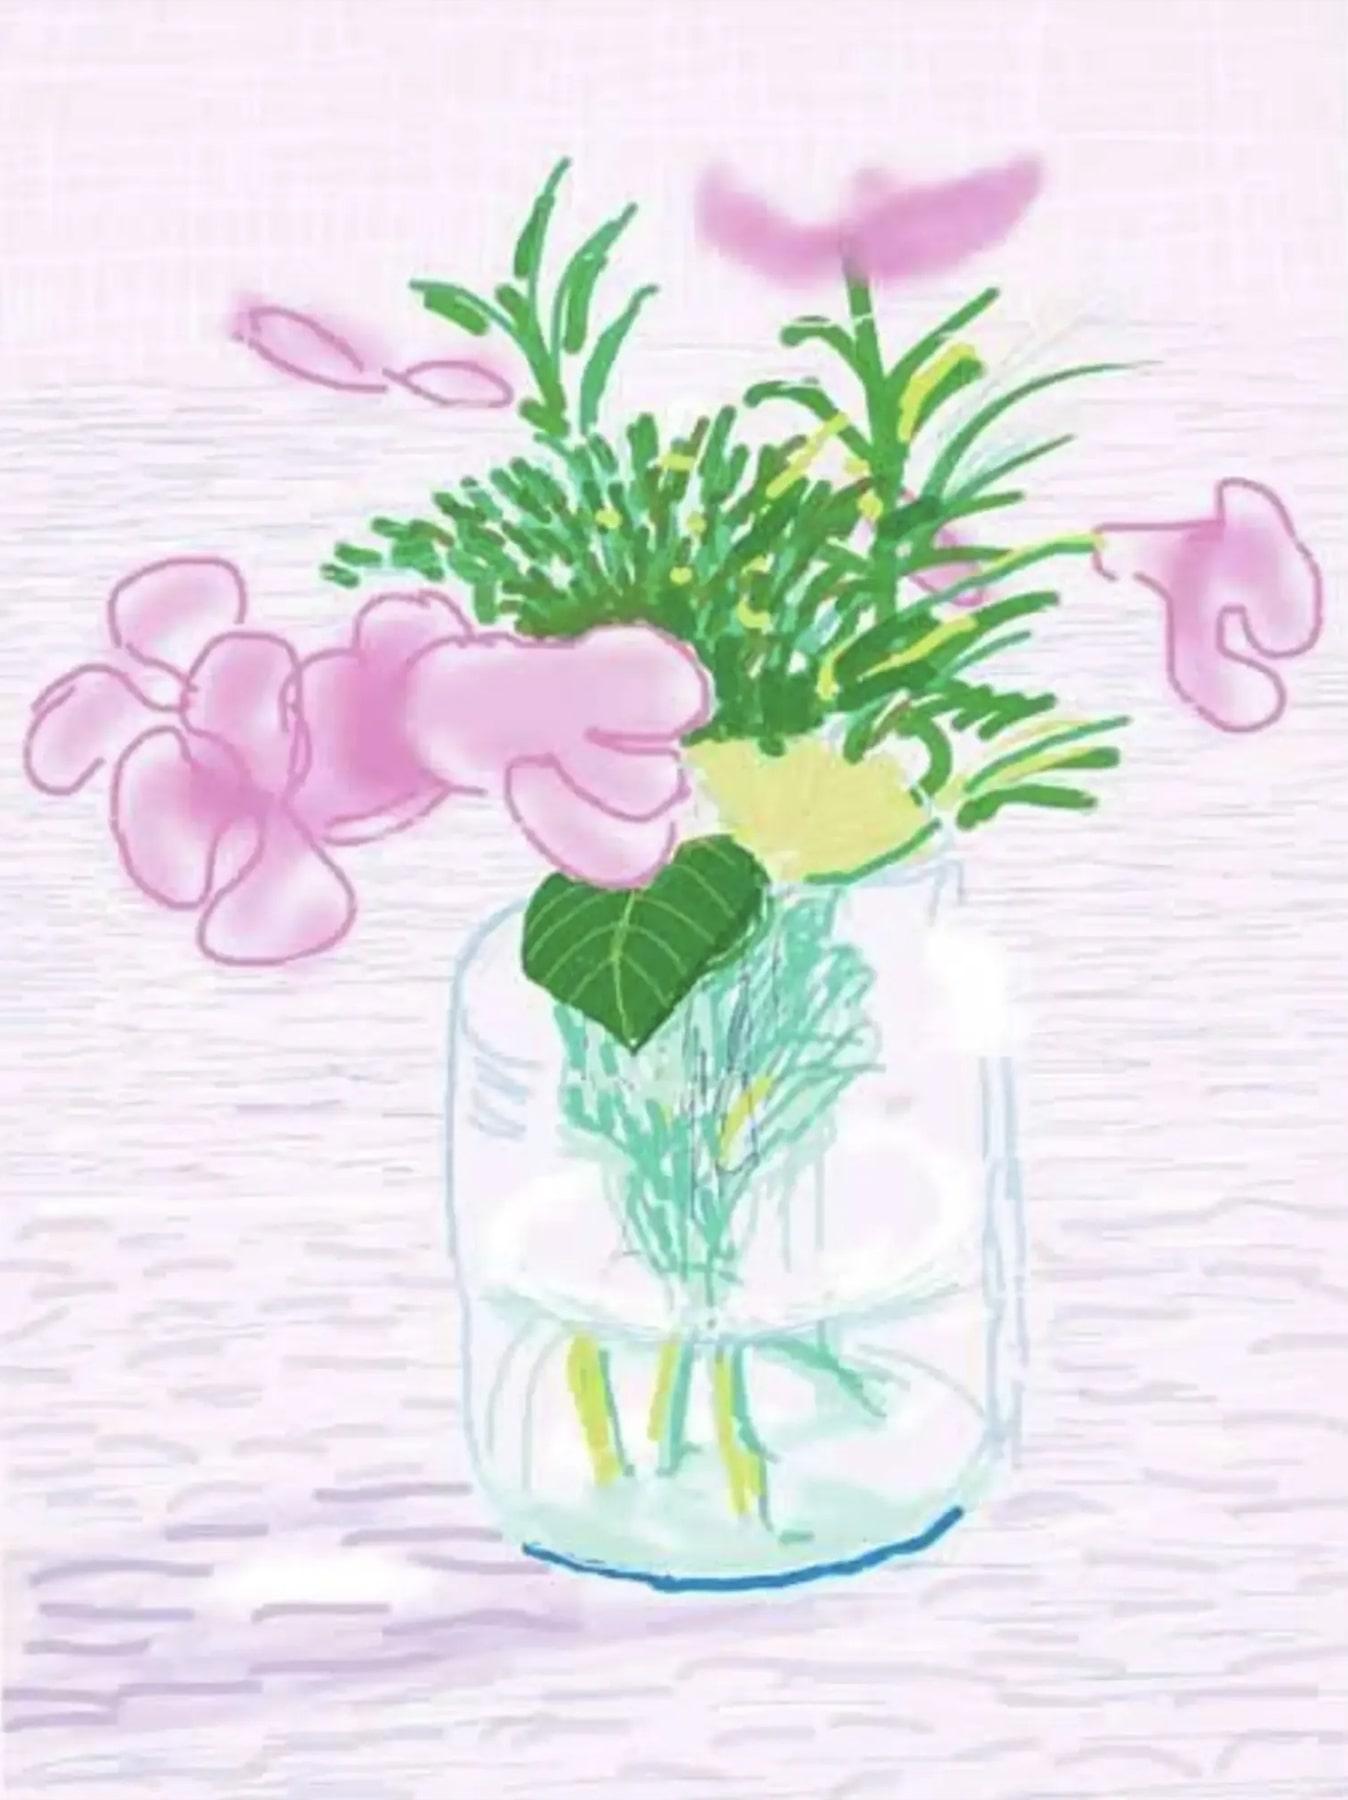 By David Hockney
LILACS
Giclée print
56cm x W 43cm
Edition of 250
Signed, numbered and dated
